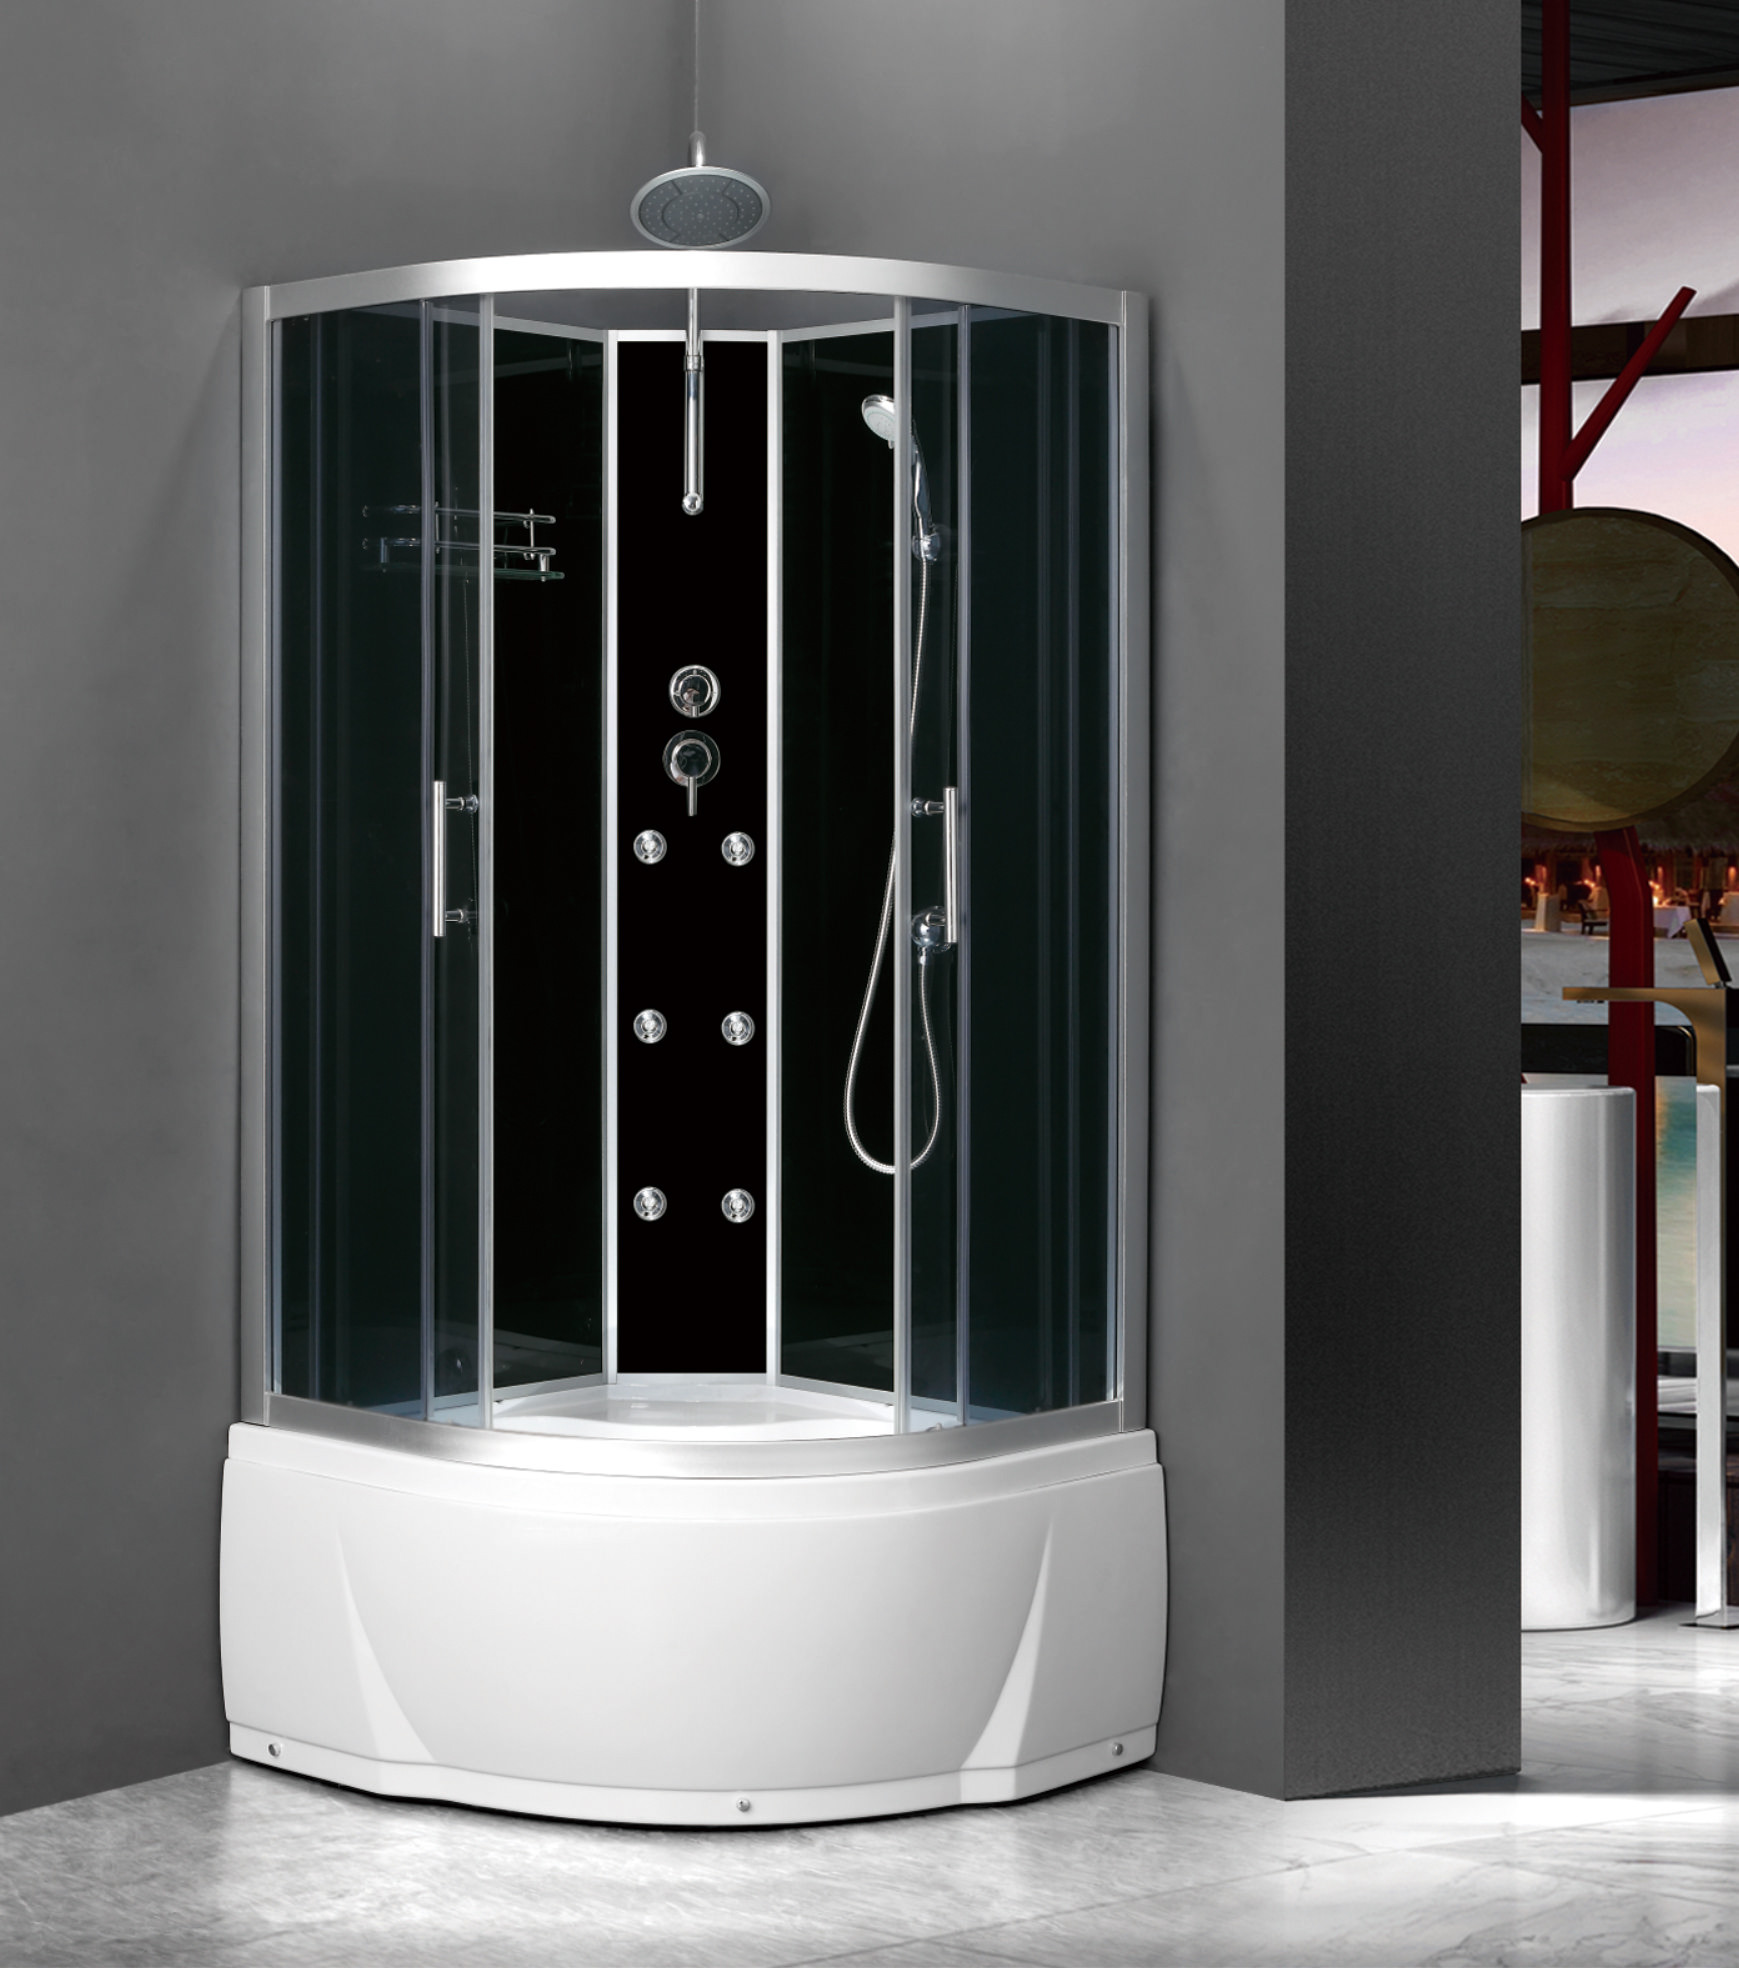 M-501-AE--Sector Shape Massage Shower Cabin Room without Roof M-501-AE.jpg